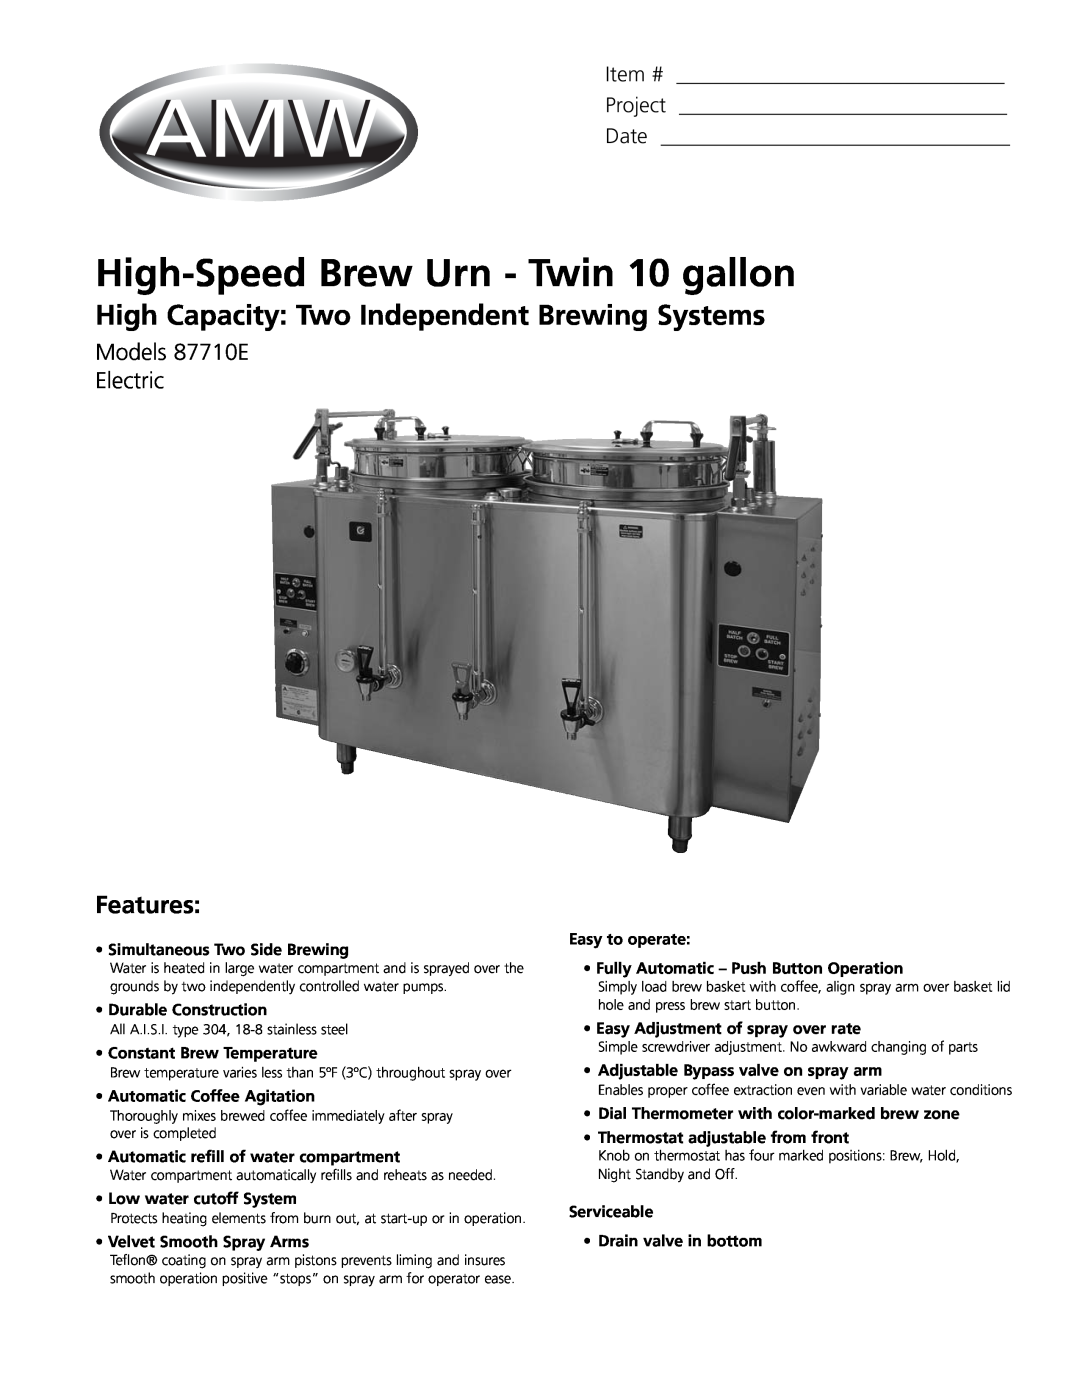 Grindmaster 87710E manual High-SpeedBrew Urn - Twin 10 gallon, High Capacity Two Independent Brewing Systems, Features 